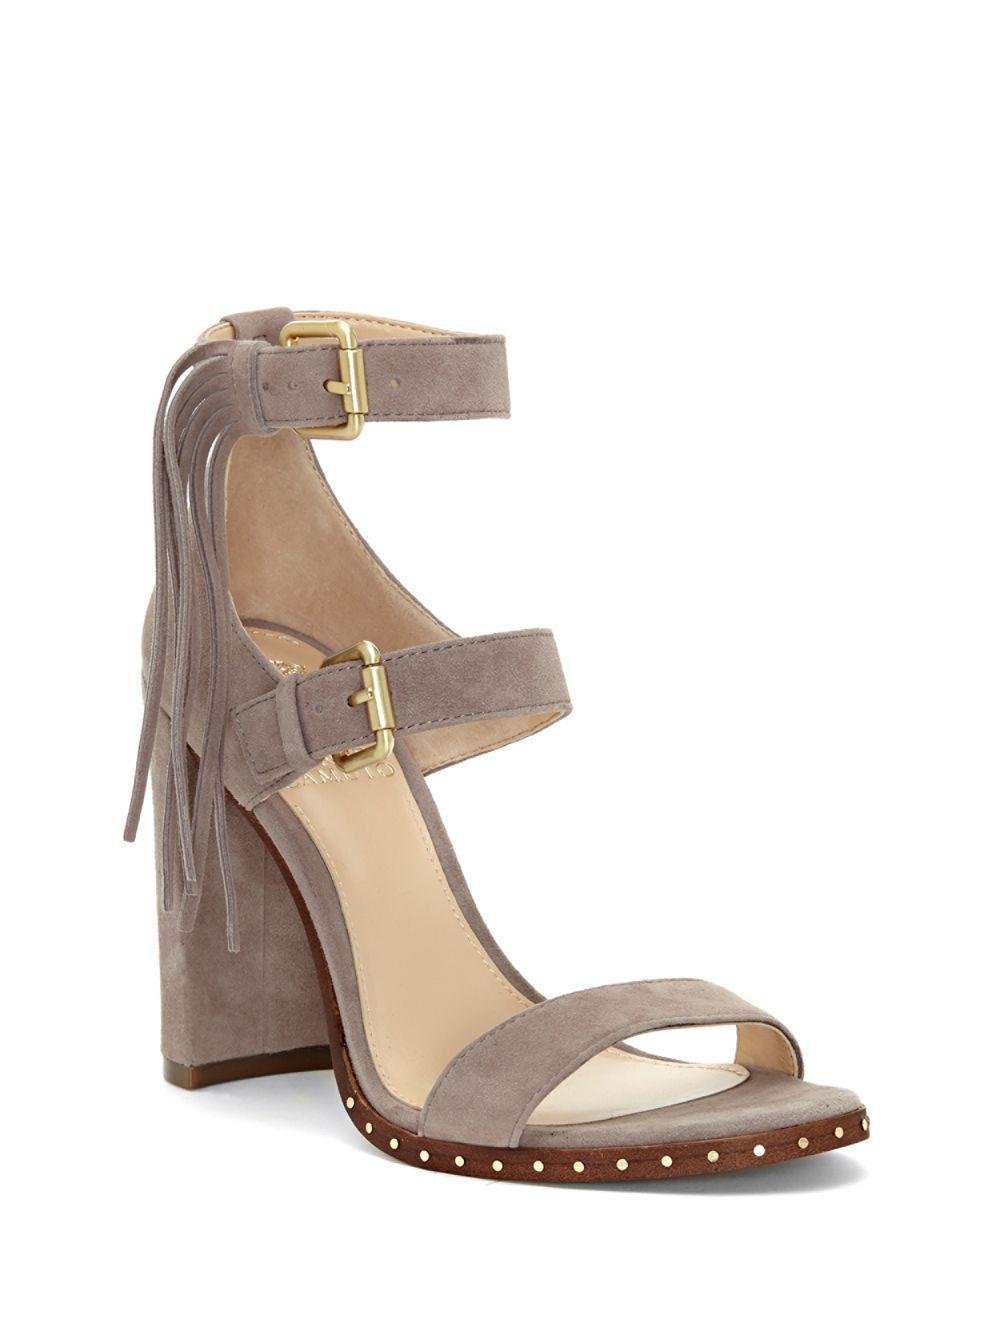 Vince Camuto Fringed Suede Sandals in 